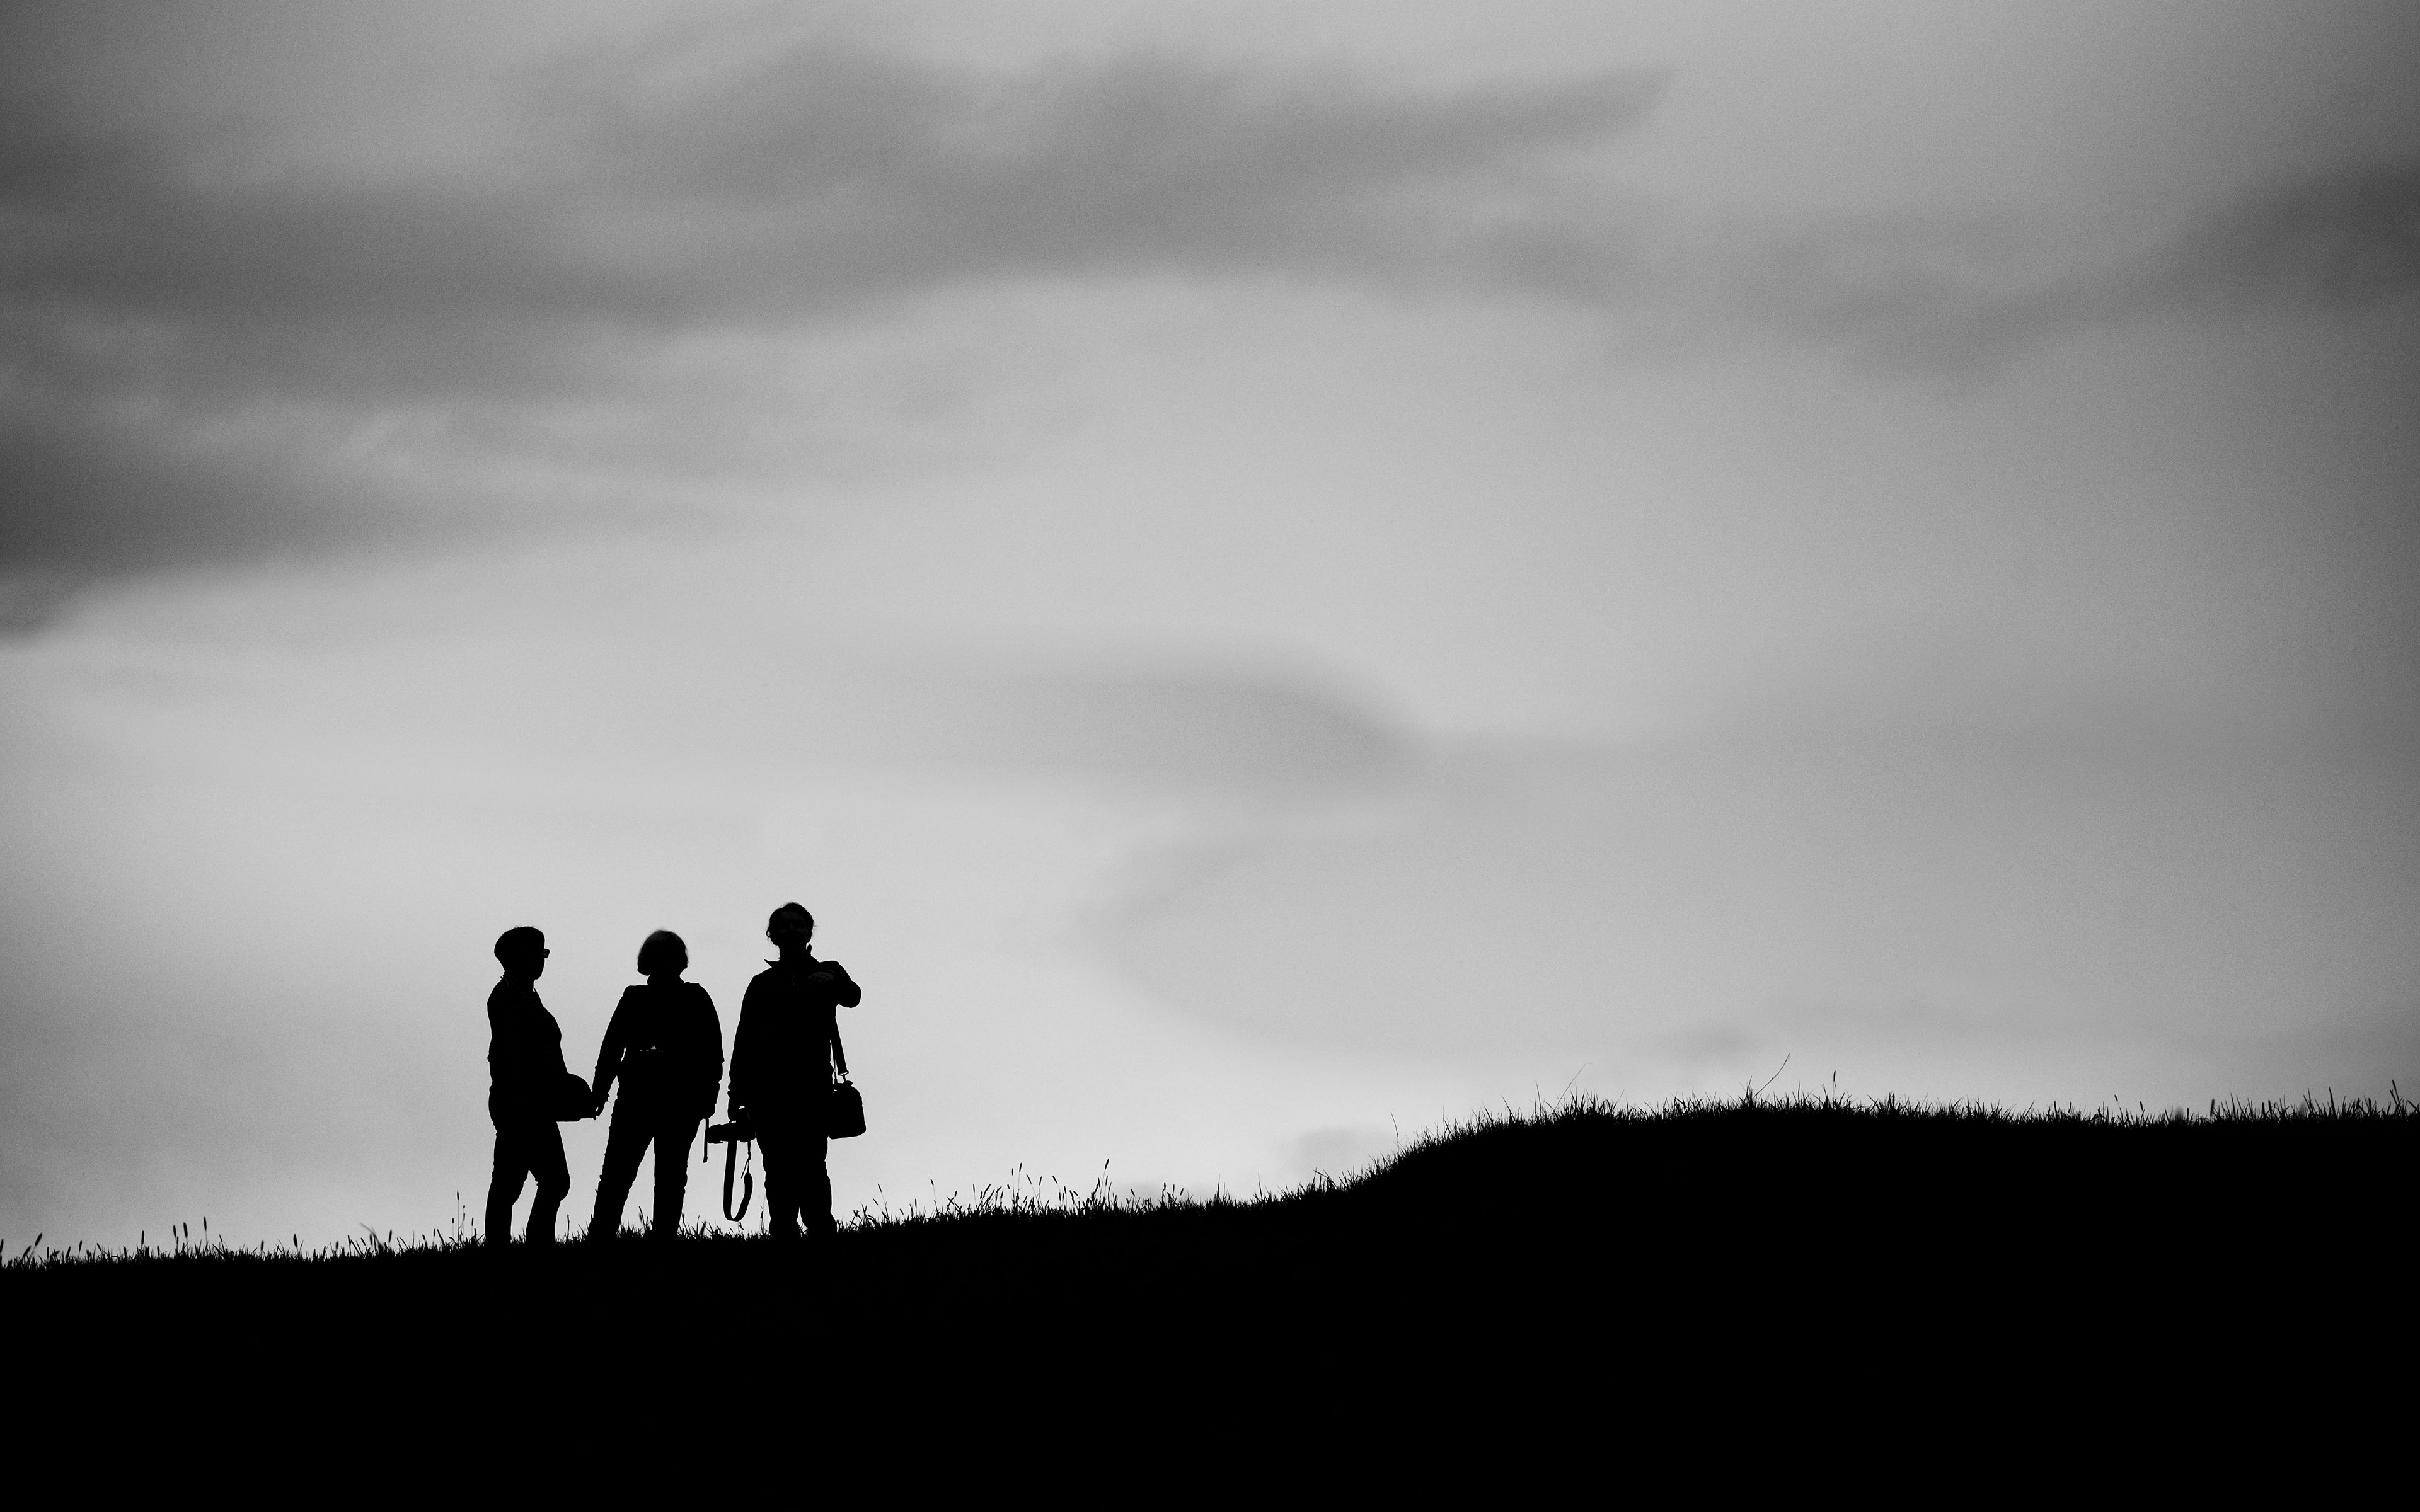 Download wallpaper 3840x2400 people, silhouettes, friends, black and white,  dark 4k ultra hd 16:10 hd background